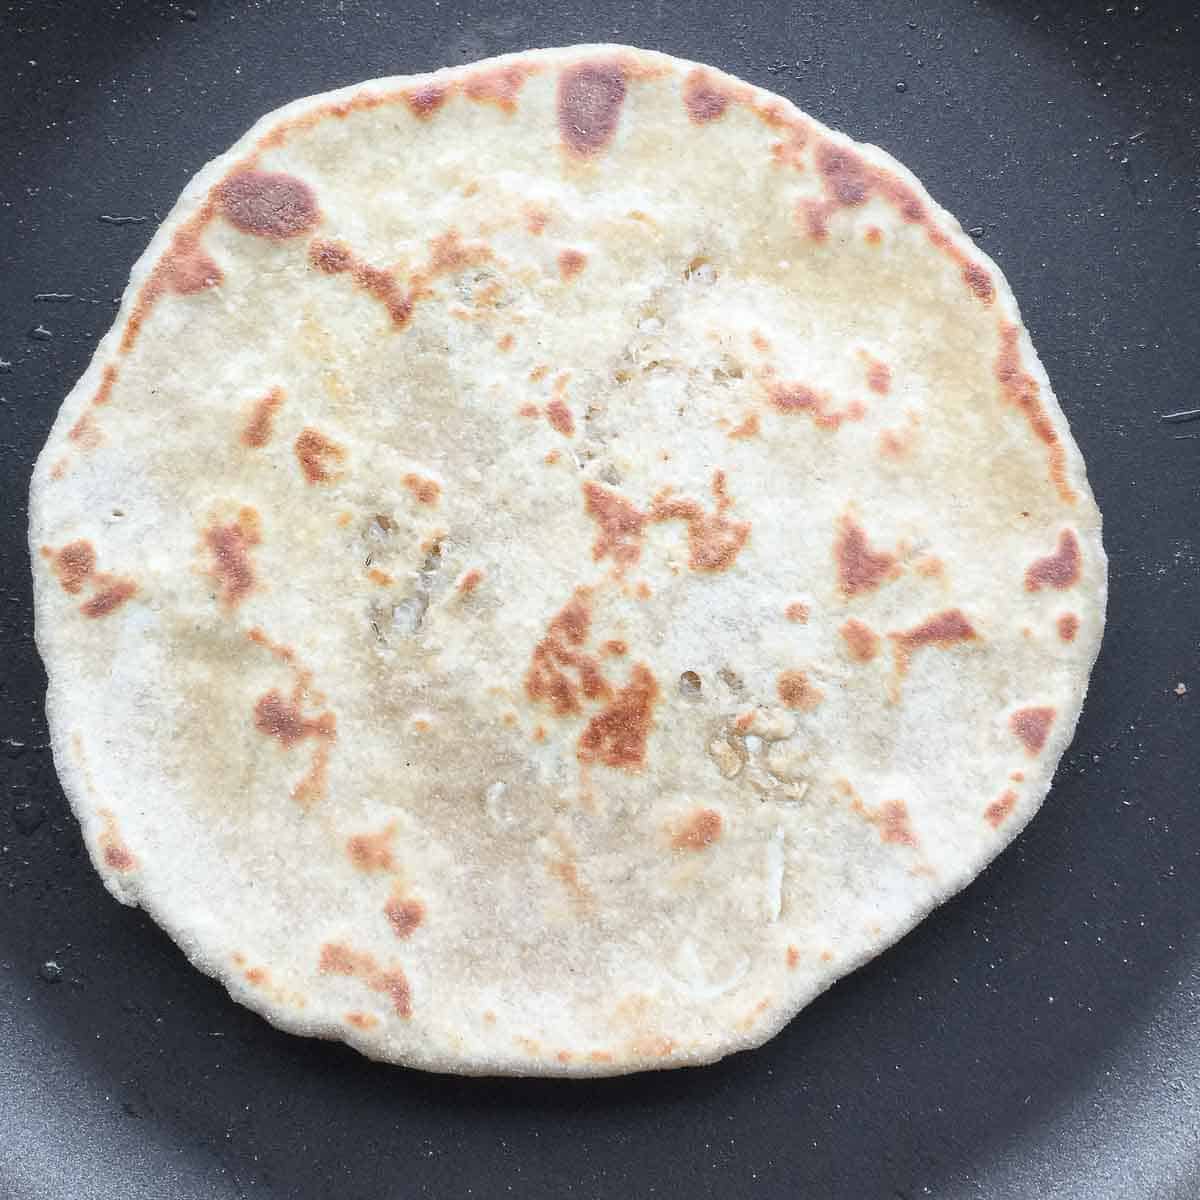 Flip and cook the mooli paratha on both sides.